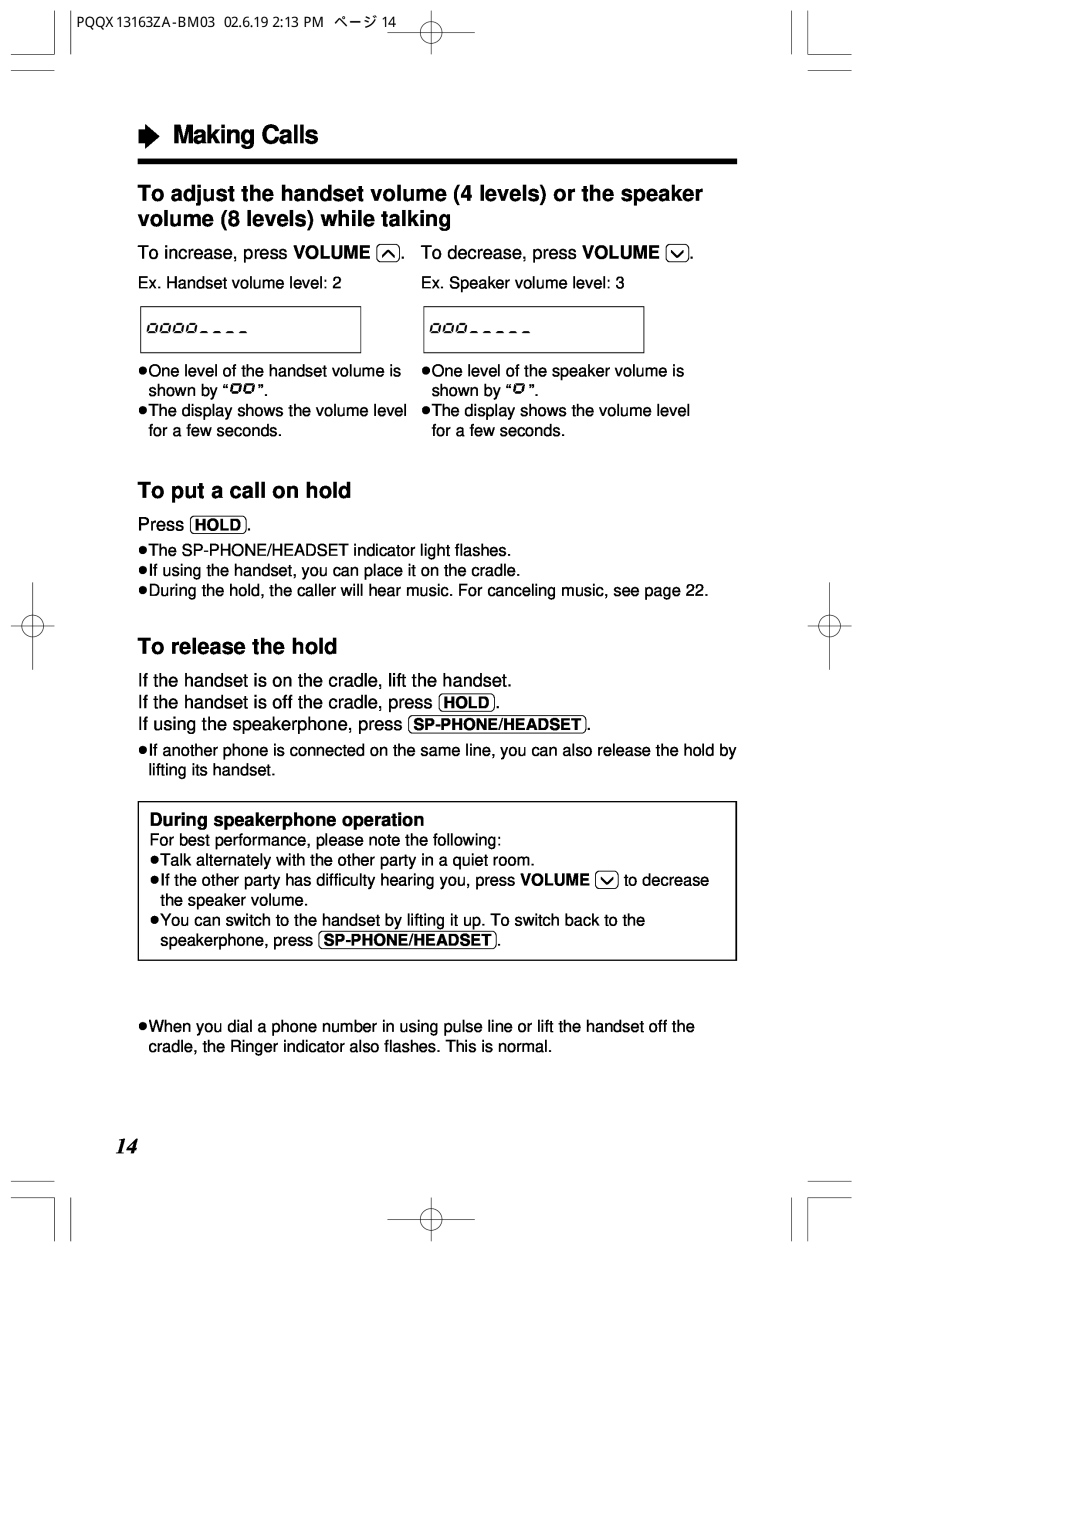 Panasonic KX-T2375SUW operating instructions “ Making Calls, To put a call on hold, To release the hold, Press HOLD 